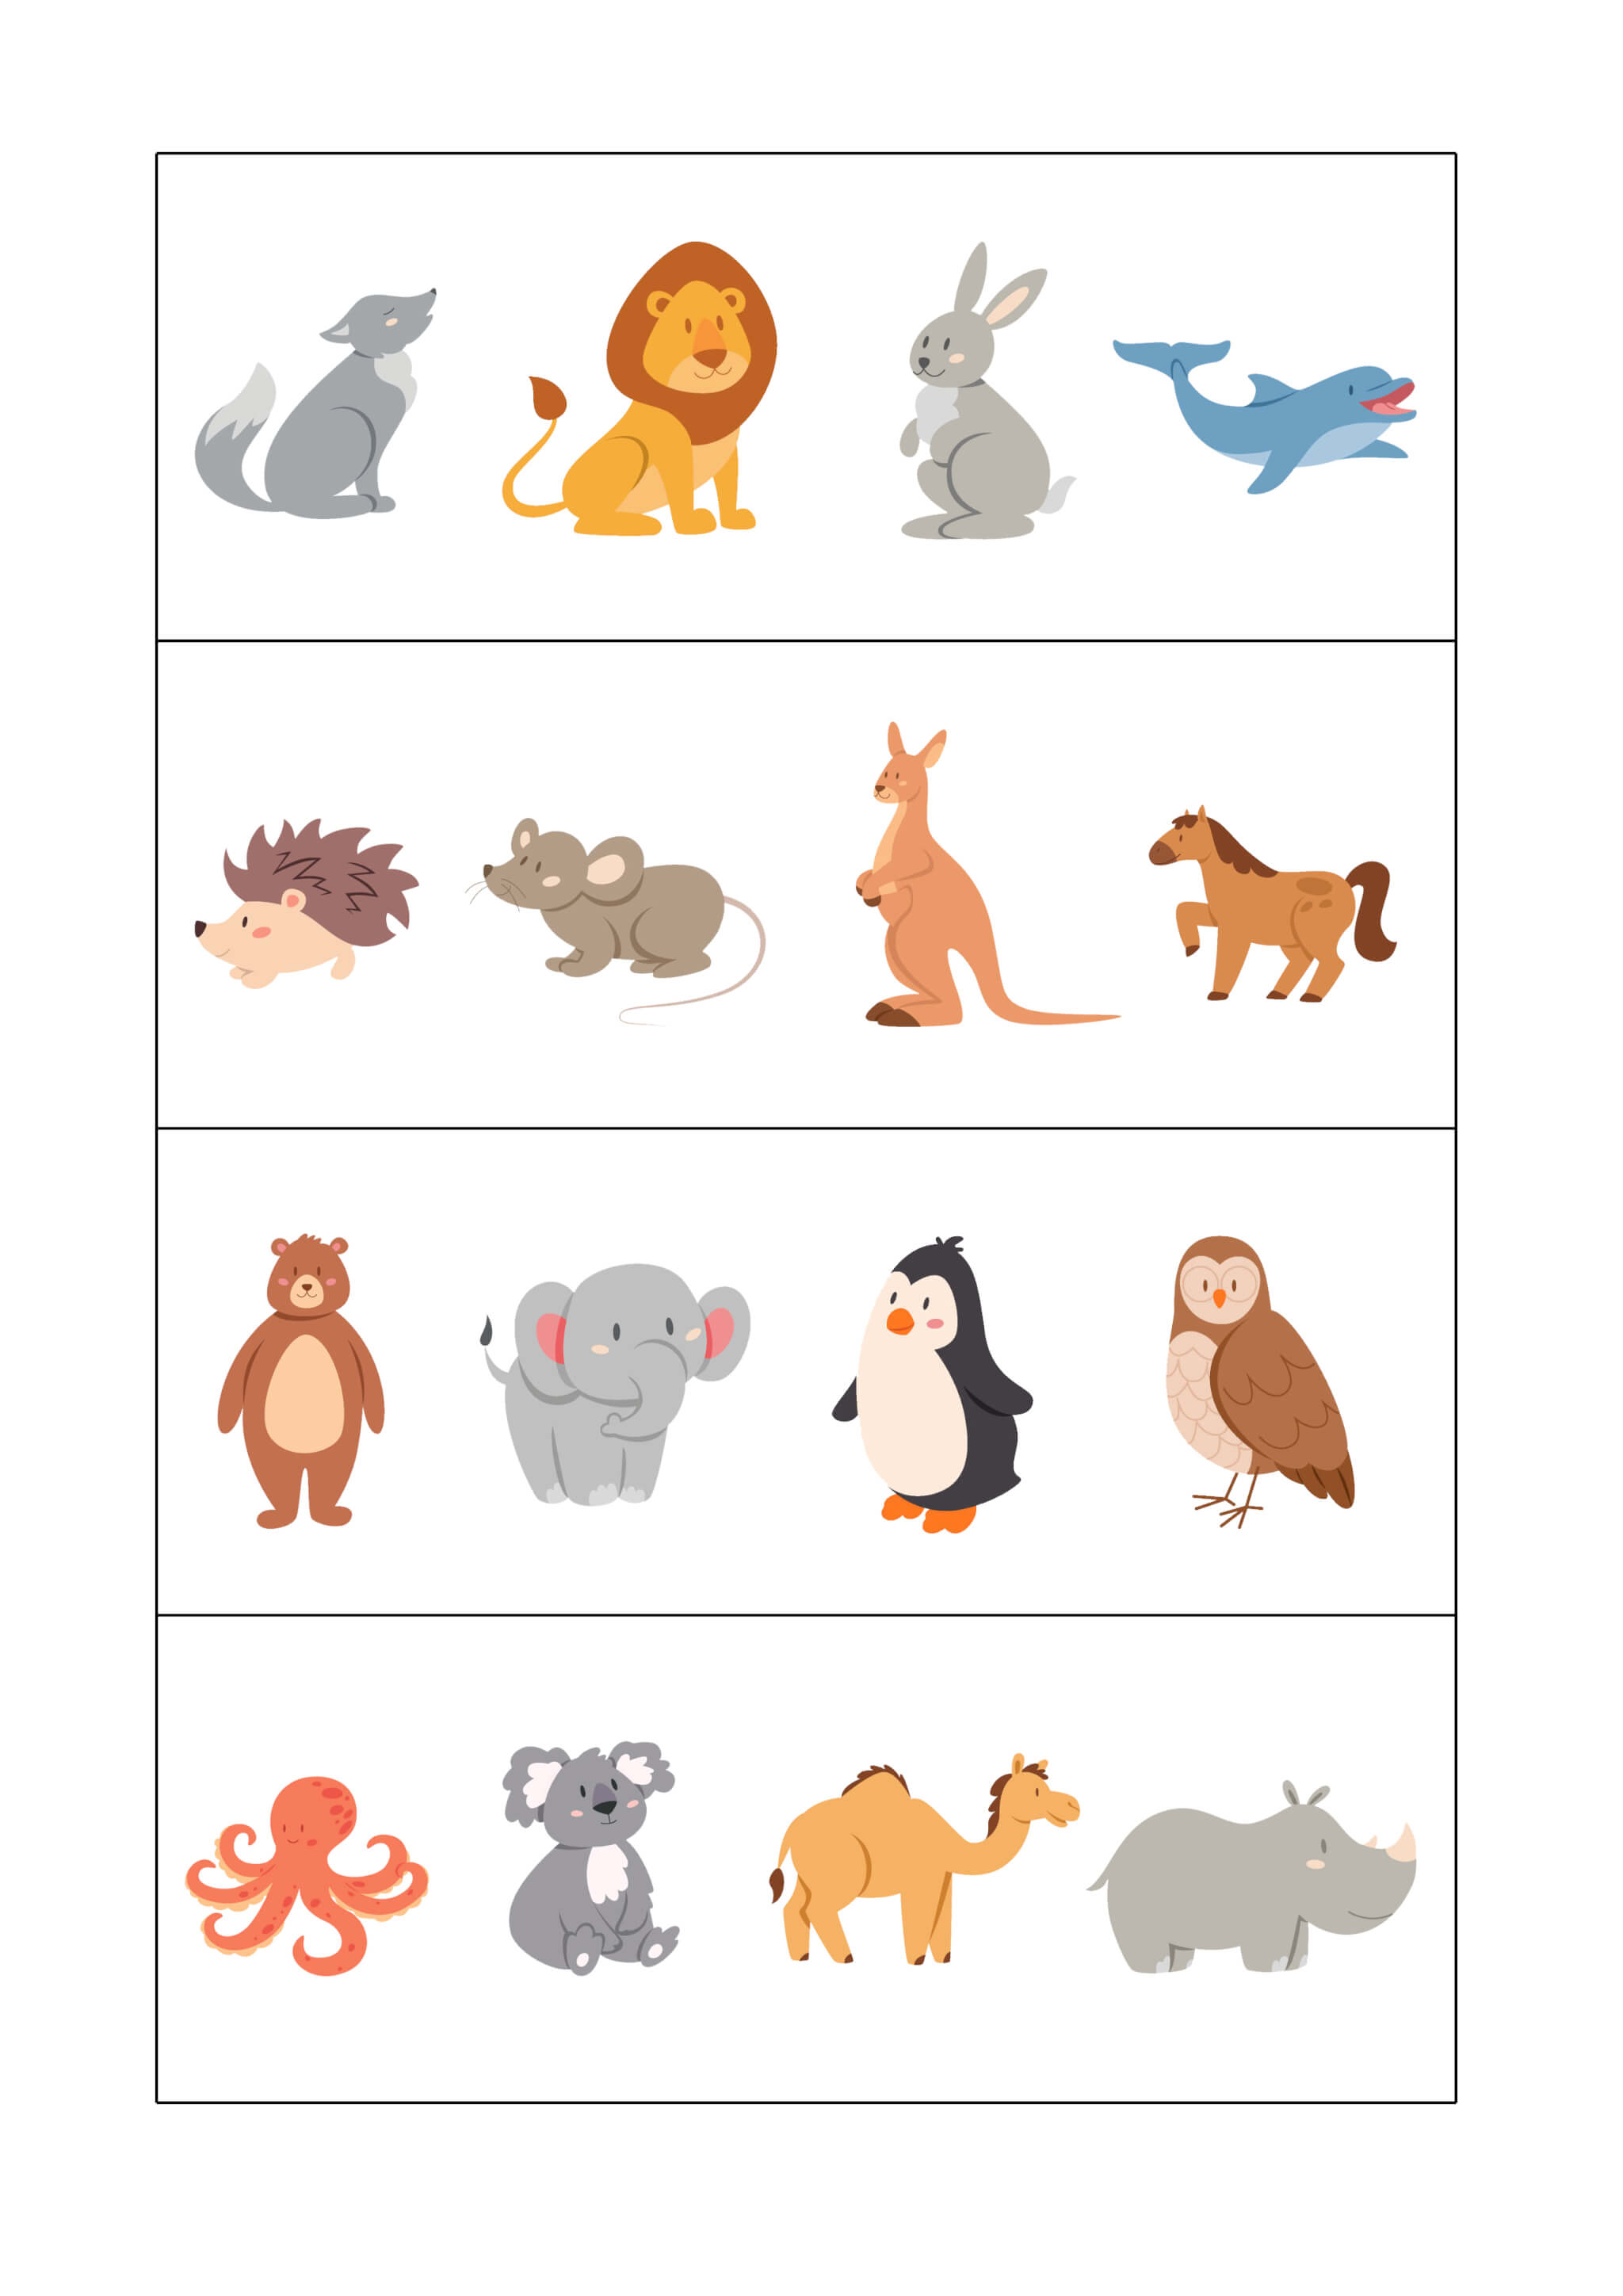 Worksheet for Preschoolers One is Out - Image 4